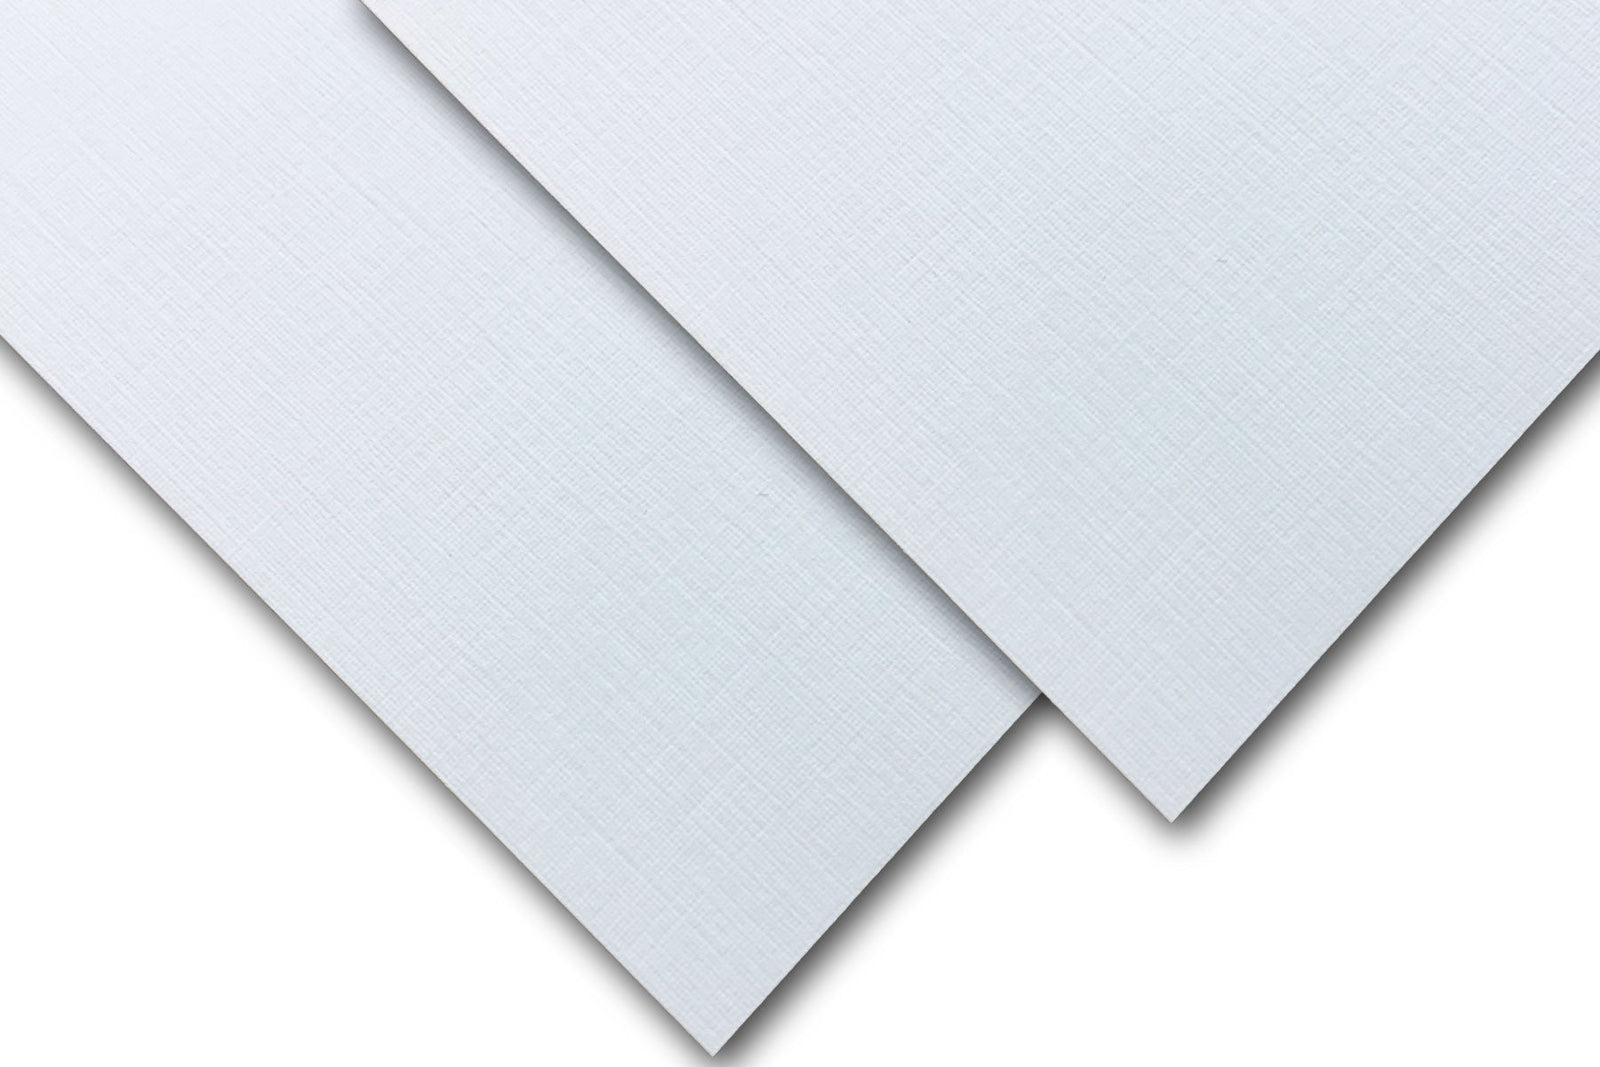 White Card Stock Paper, 8.5 x 11 -Office-School Supplies, Art Projects (5  Pack) 